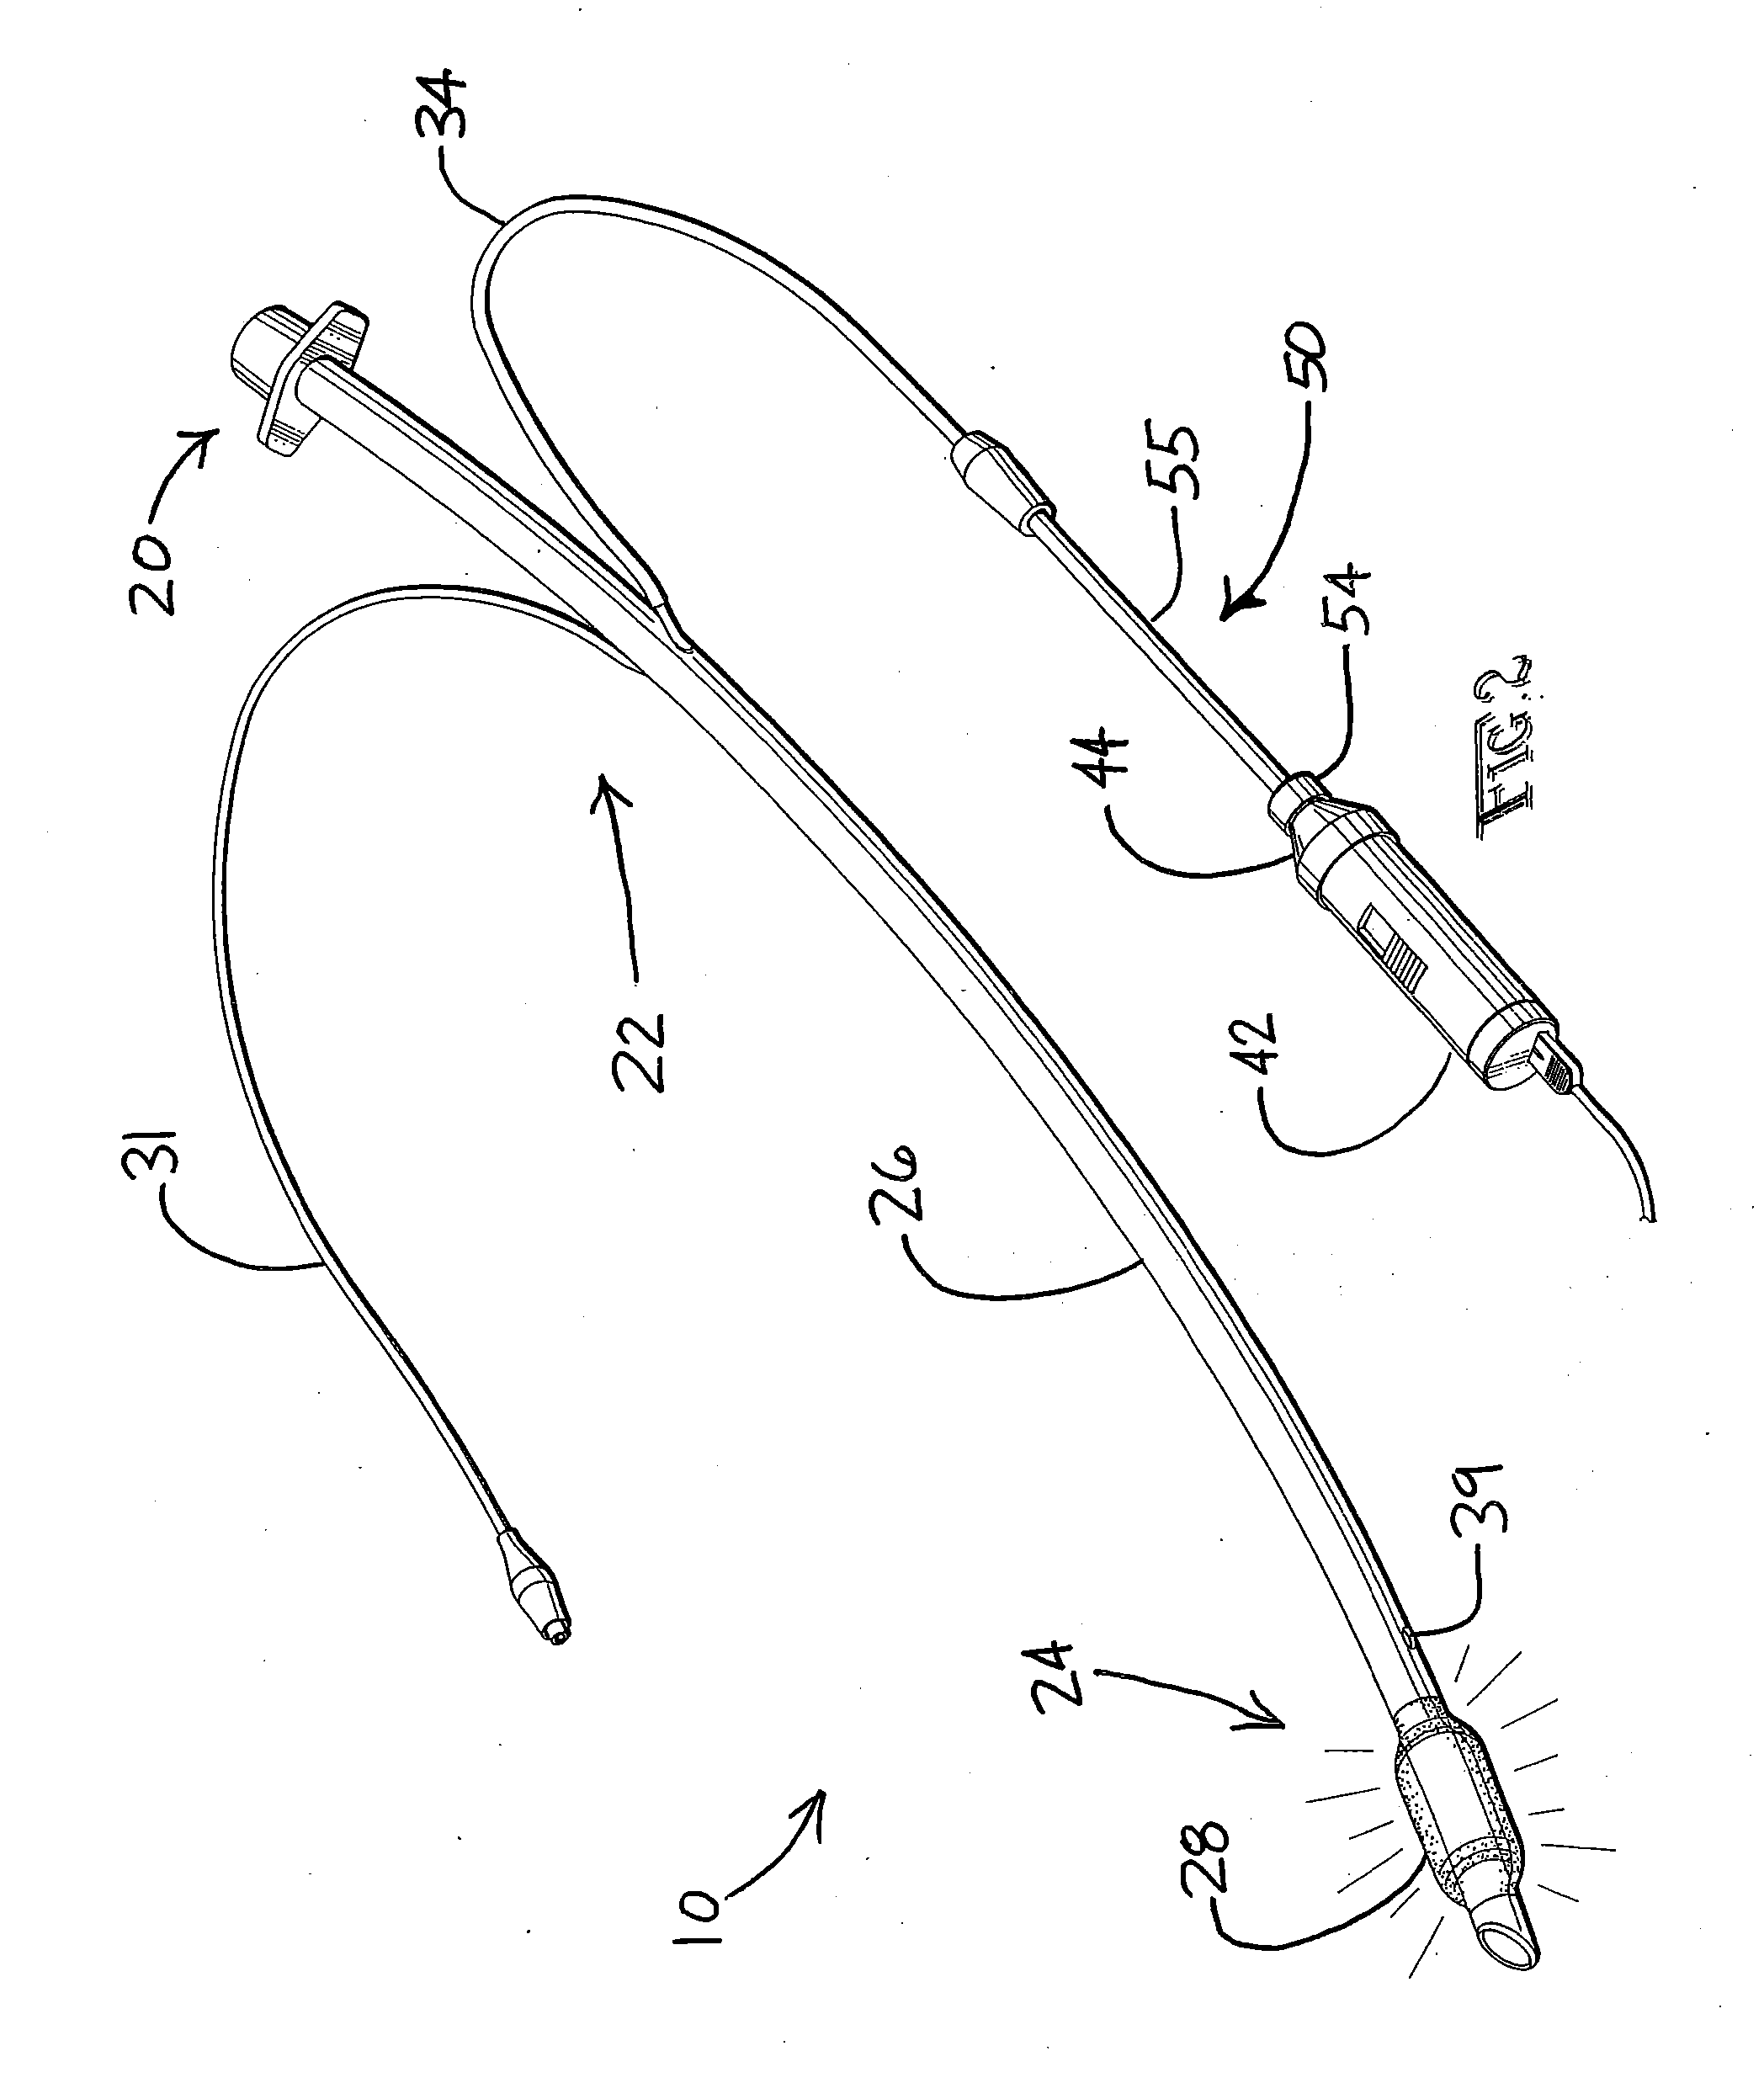 Systems and Methods for Endotracheal Tube Positioning